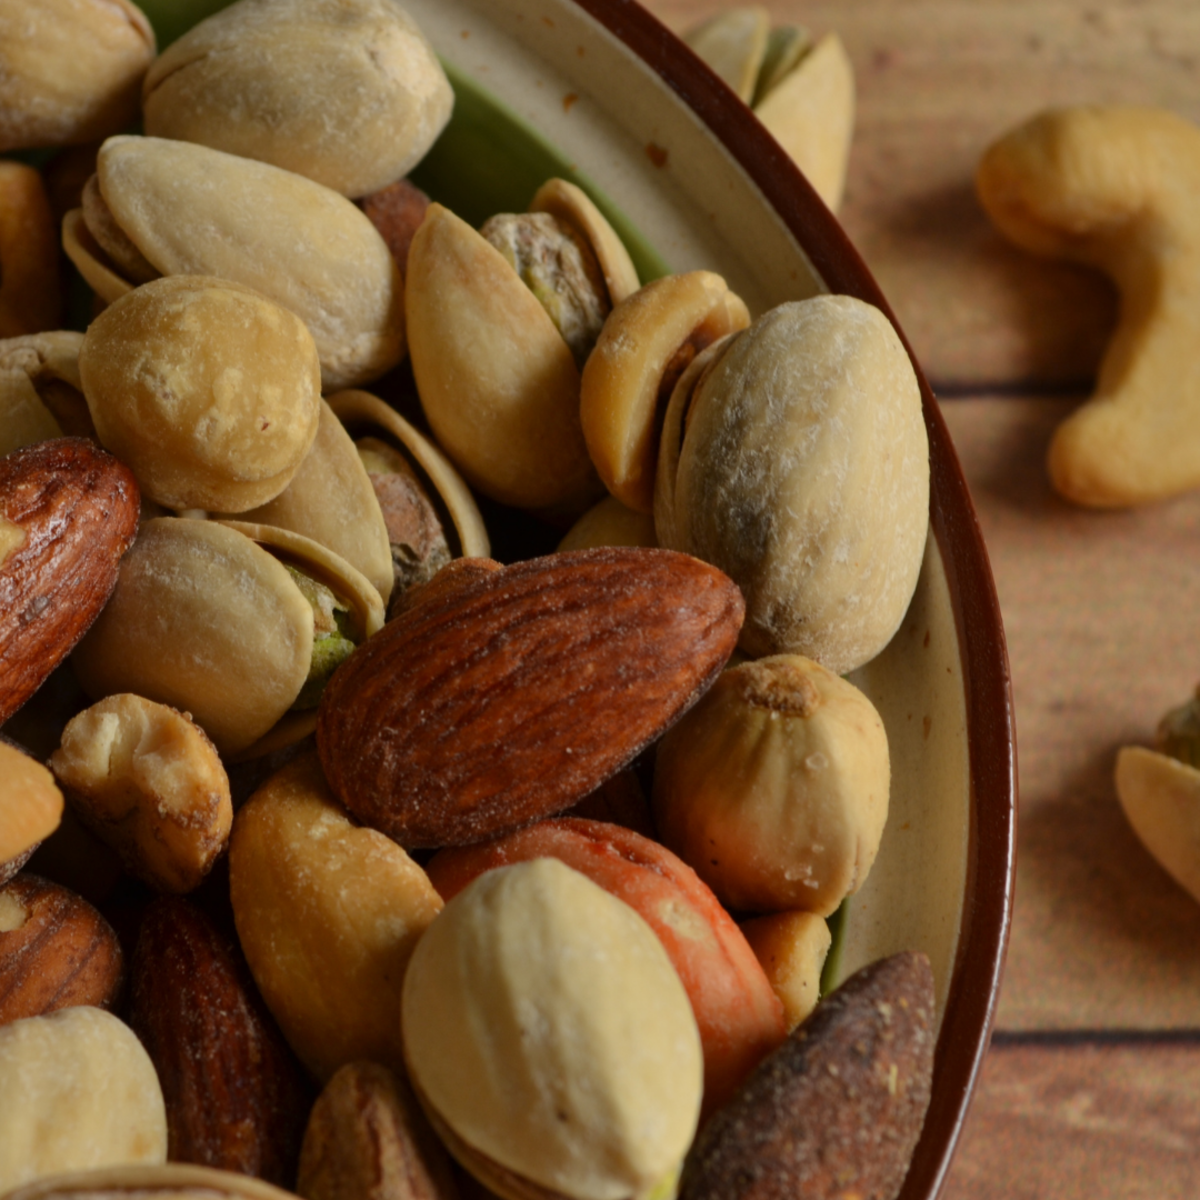 Dogs can eat certain types of nuts but should never be fed macadamia nuts.